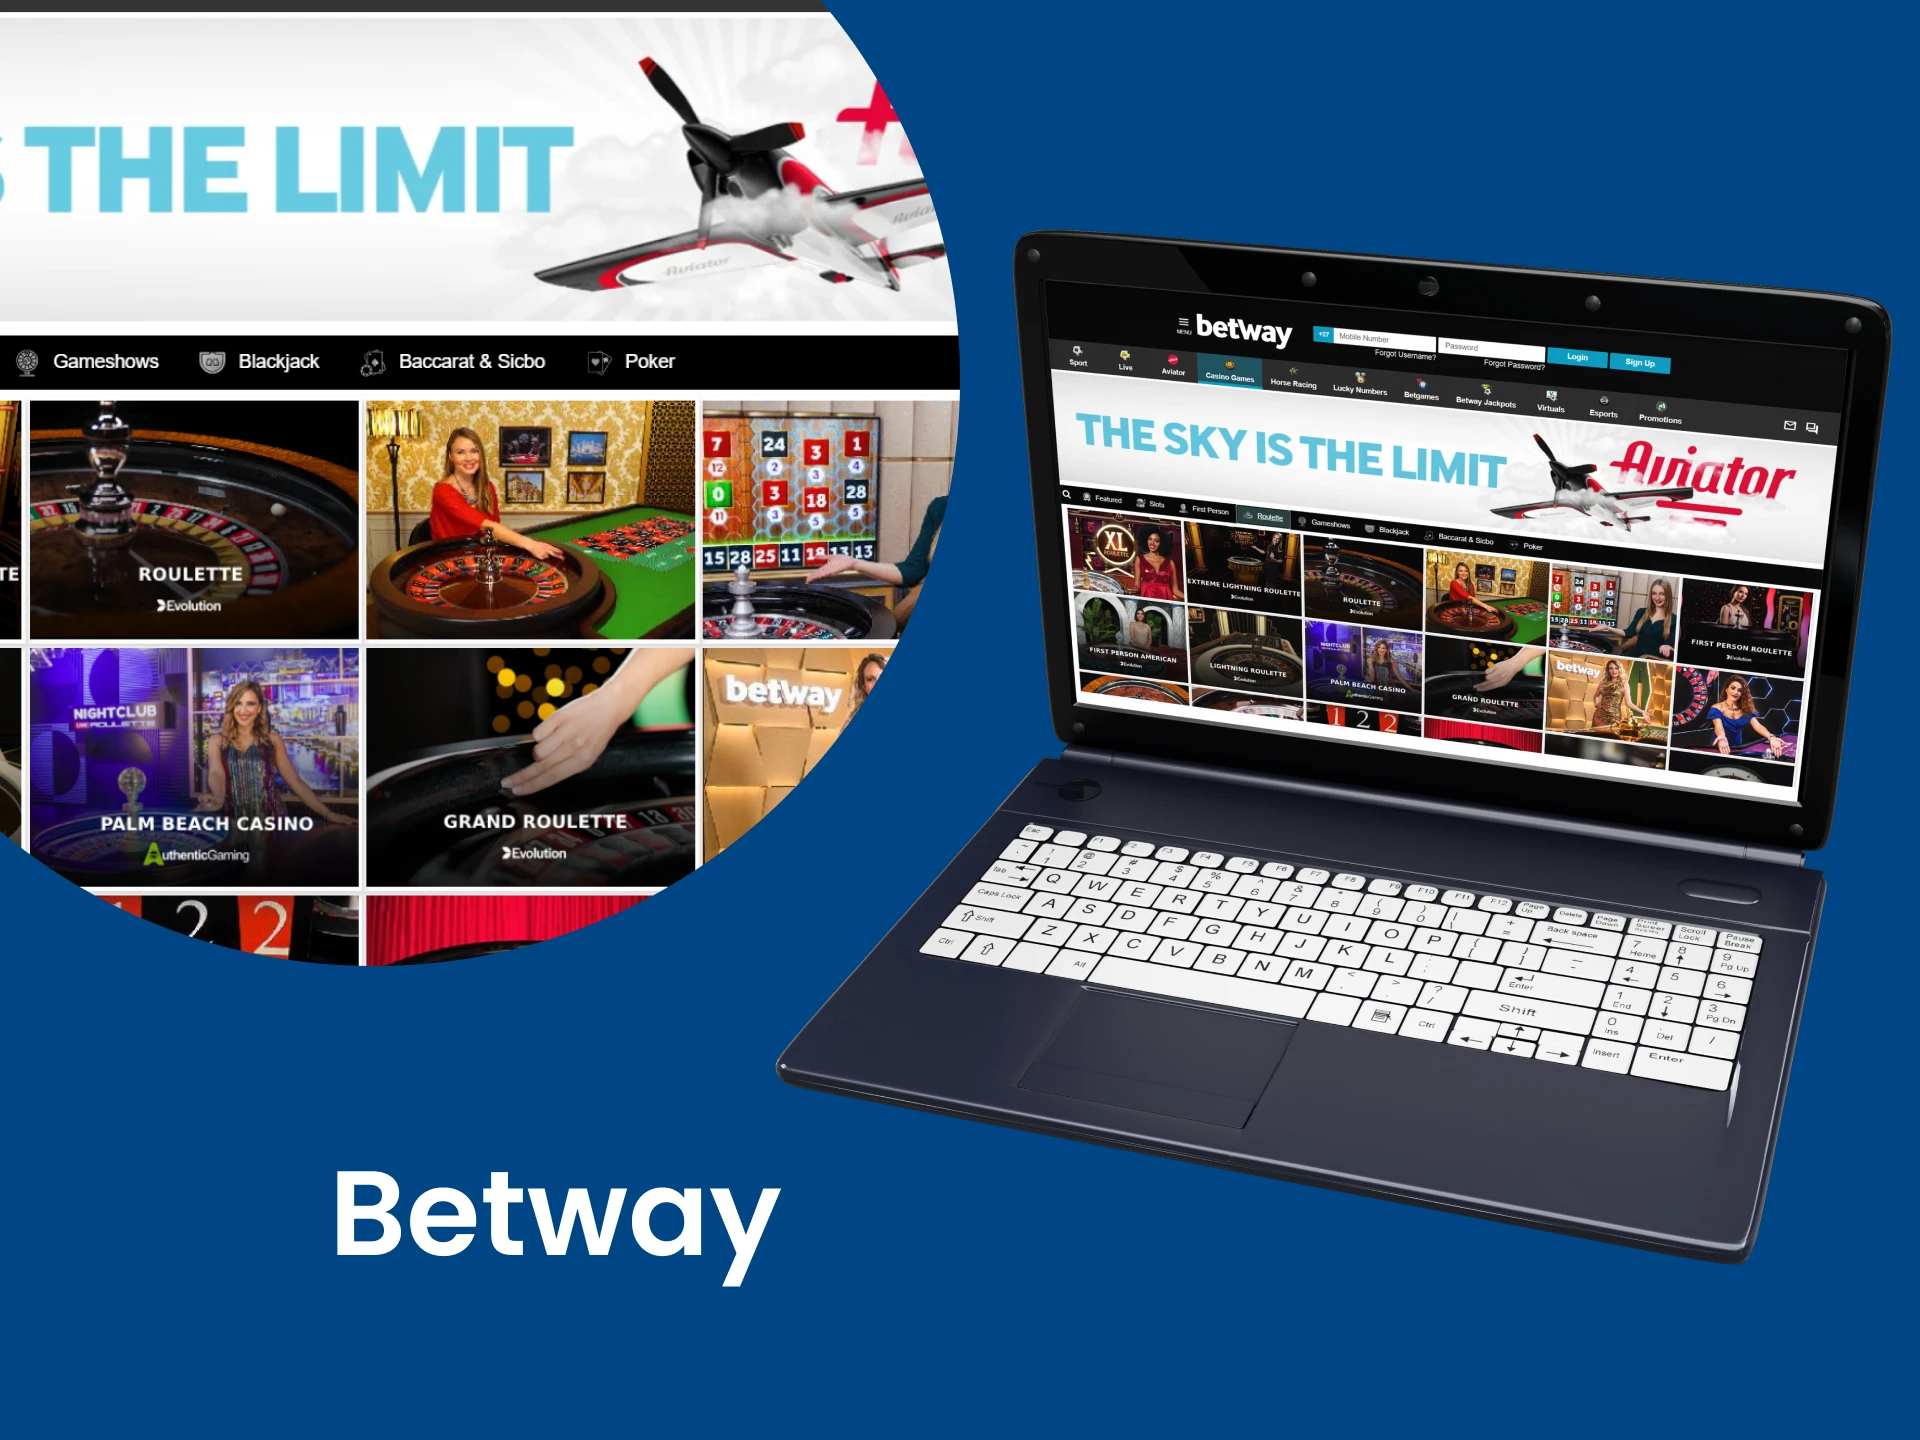 Betway is ideal for playing roulette.